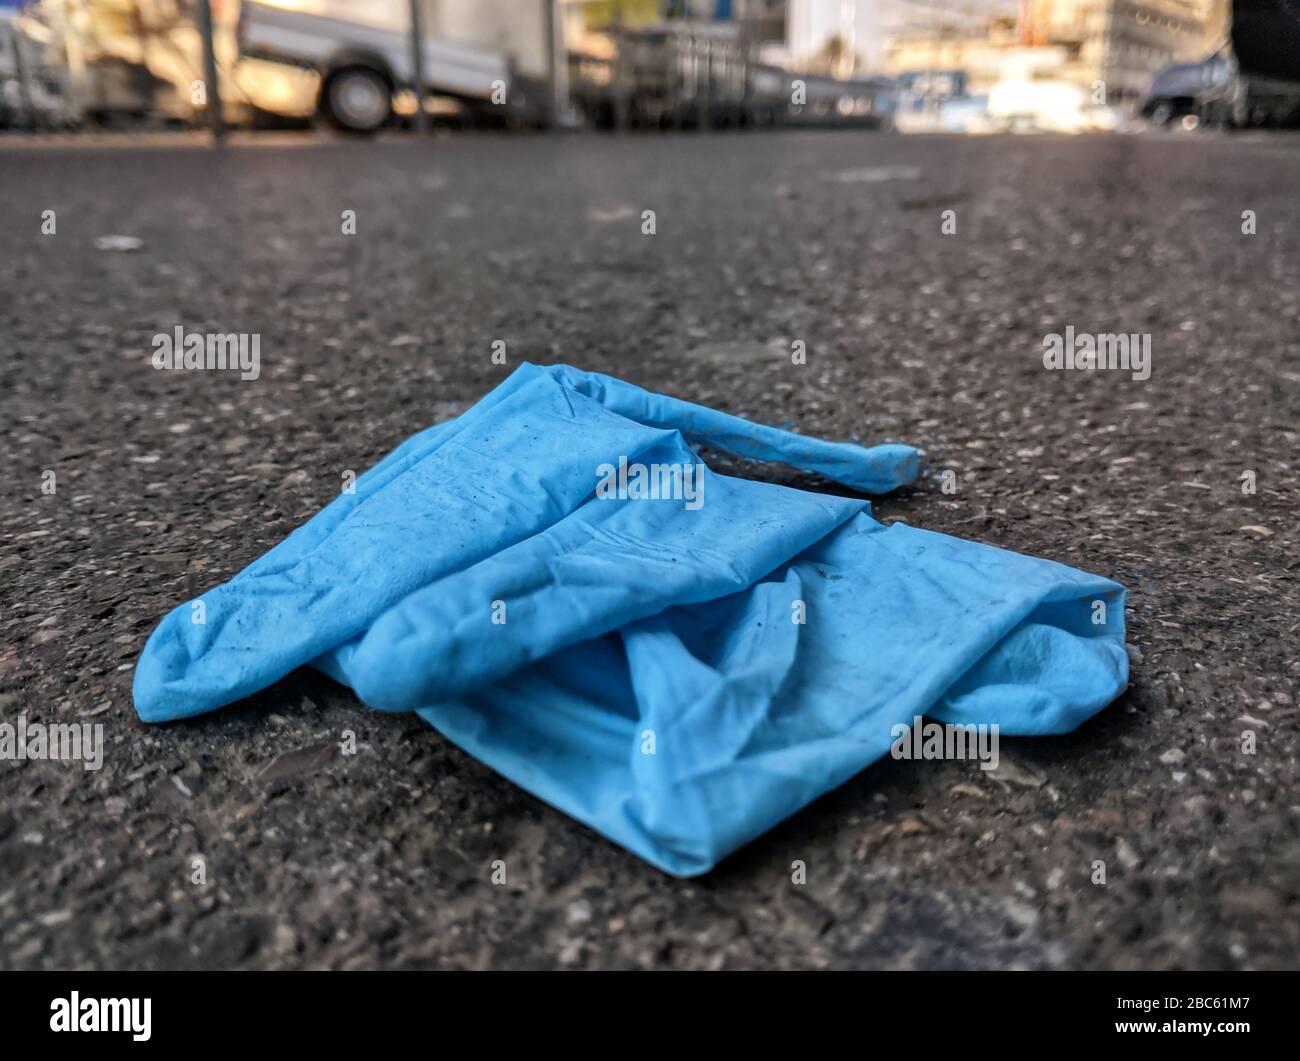 Munich, Bavaria, Germany. 3rd Apr, 2020. Discarded disposable gloves and other personal protective equipment are sights seen often in Germany in the era of the worldwide Coronavirus outbreak. Credit: Sachelle Babbar/ZUMA Wire/Alamy Live News Stock Photo